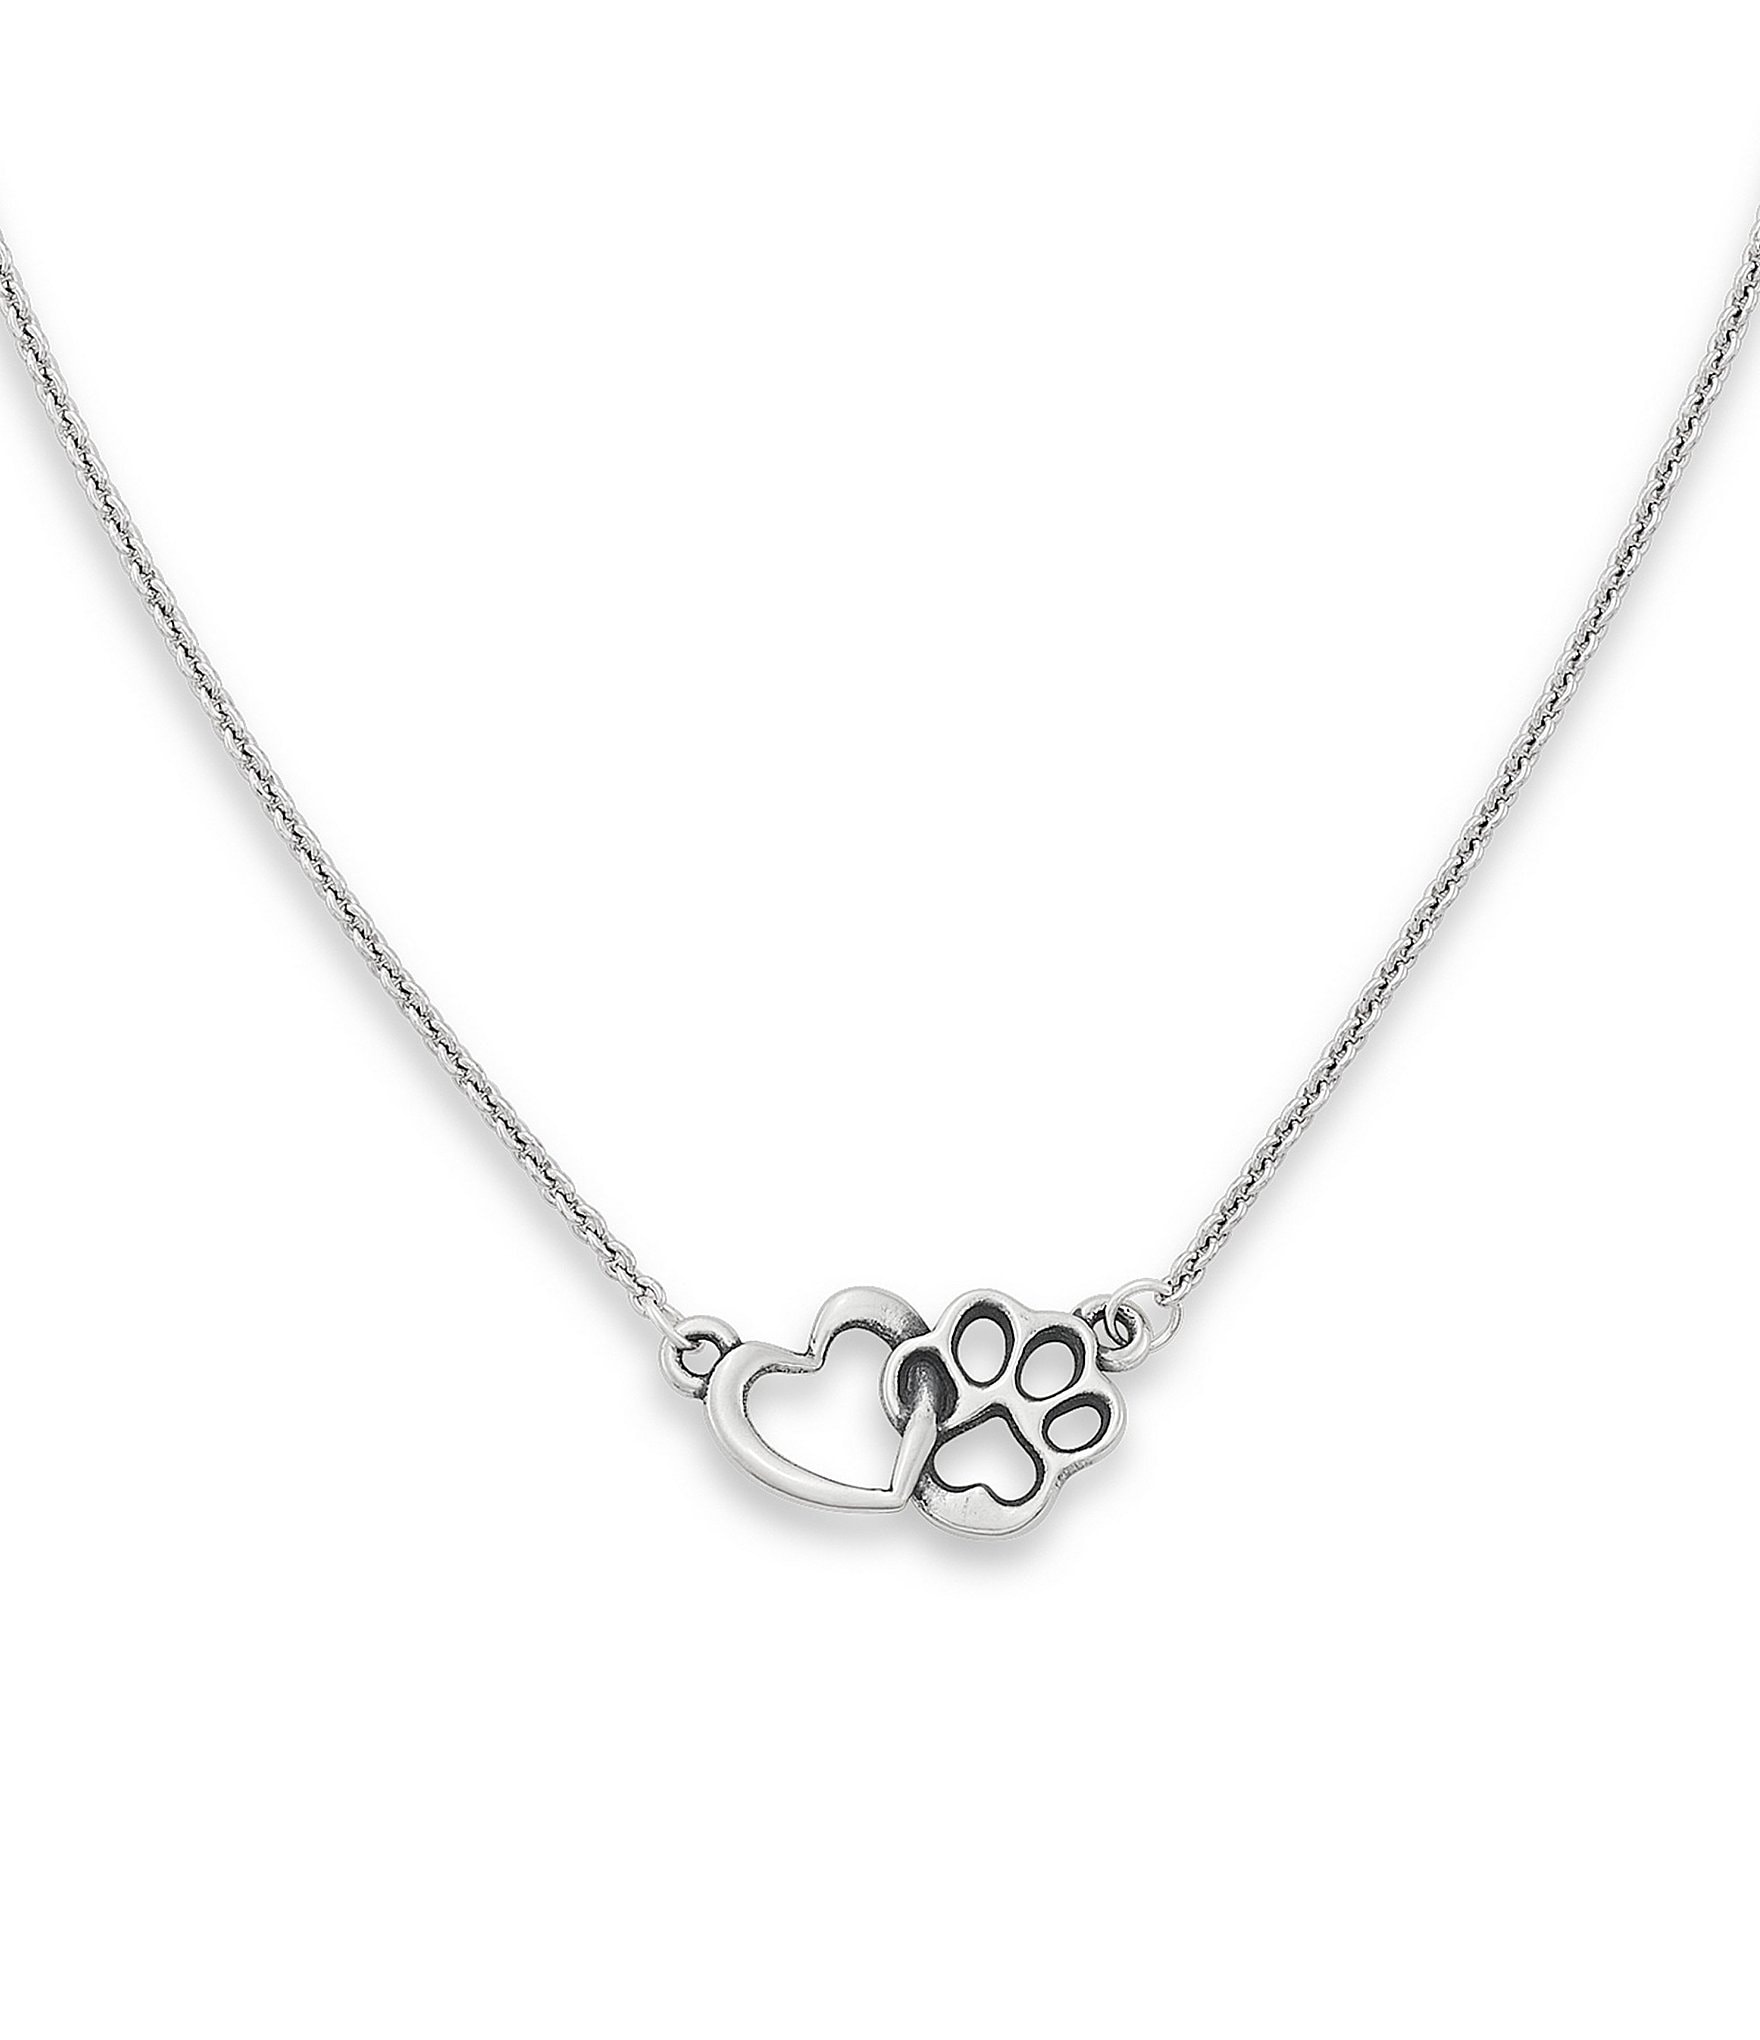 James Avery Twisted Link Sterling Silver Chain - 26 in.